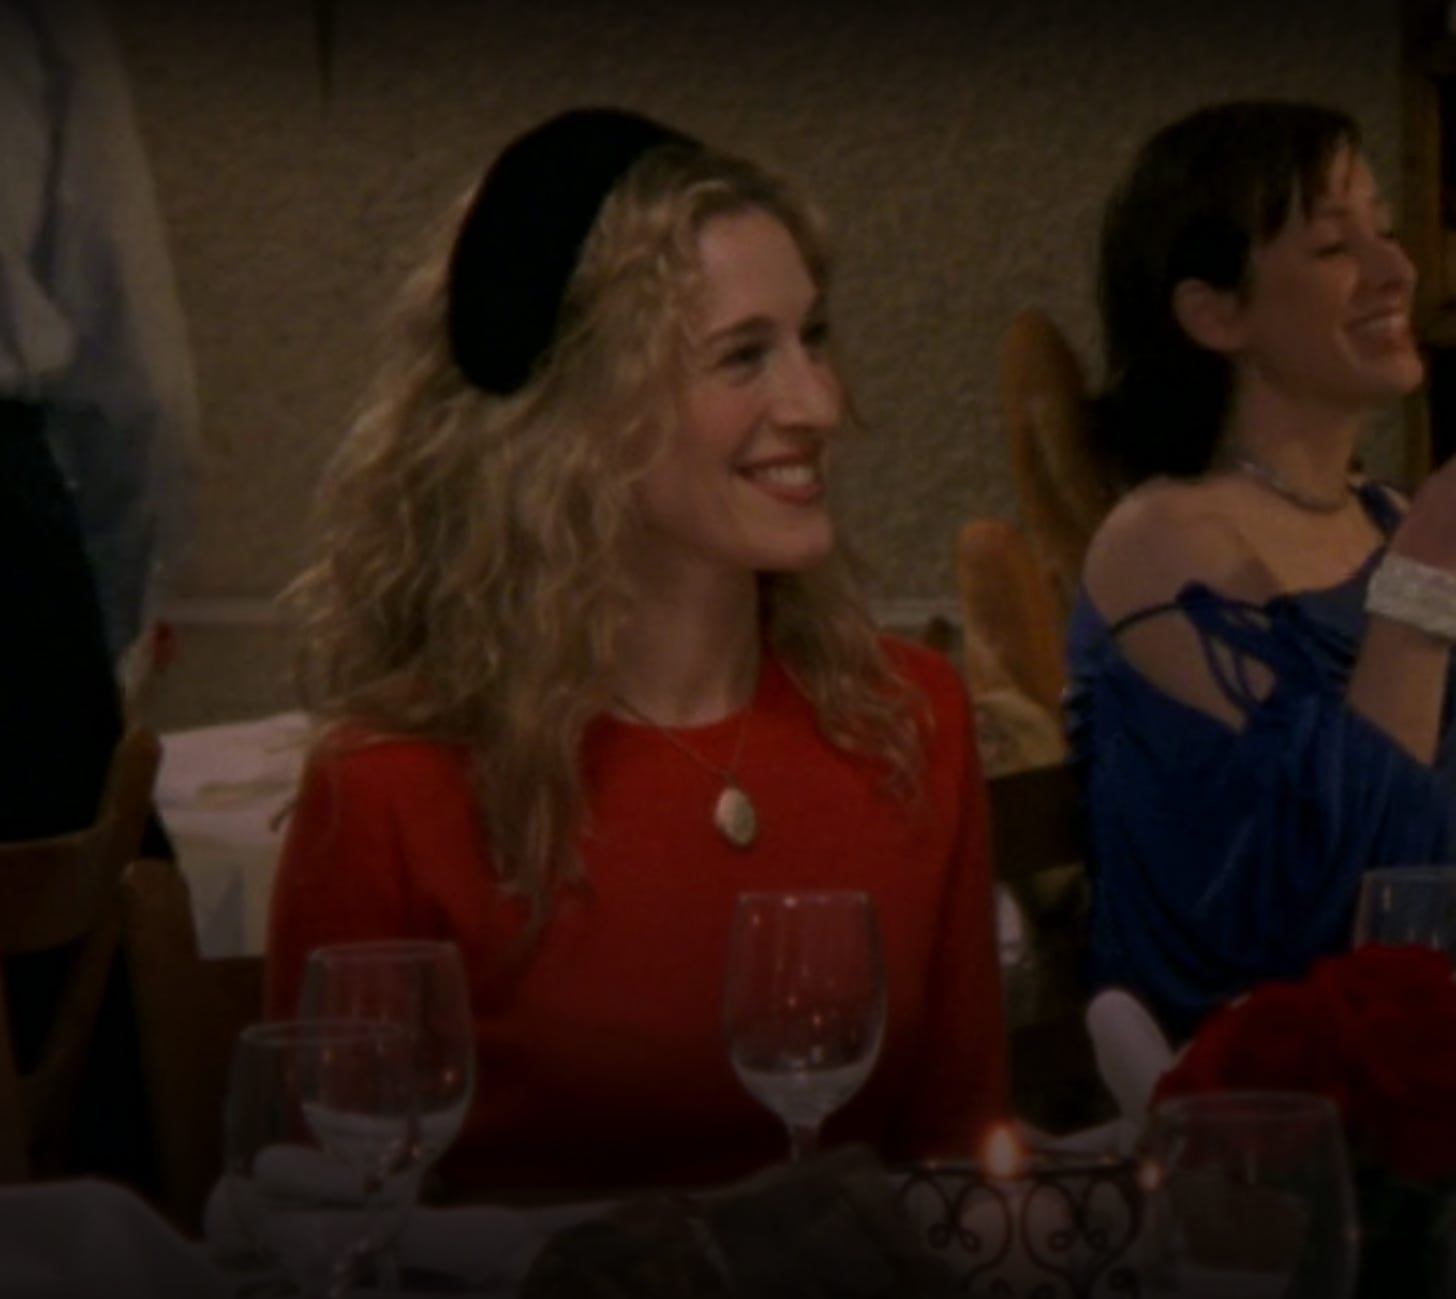 Prada headband in Season 4 Ep 1 of Sex and the City, aired June 3rd, 2001